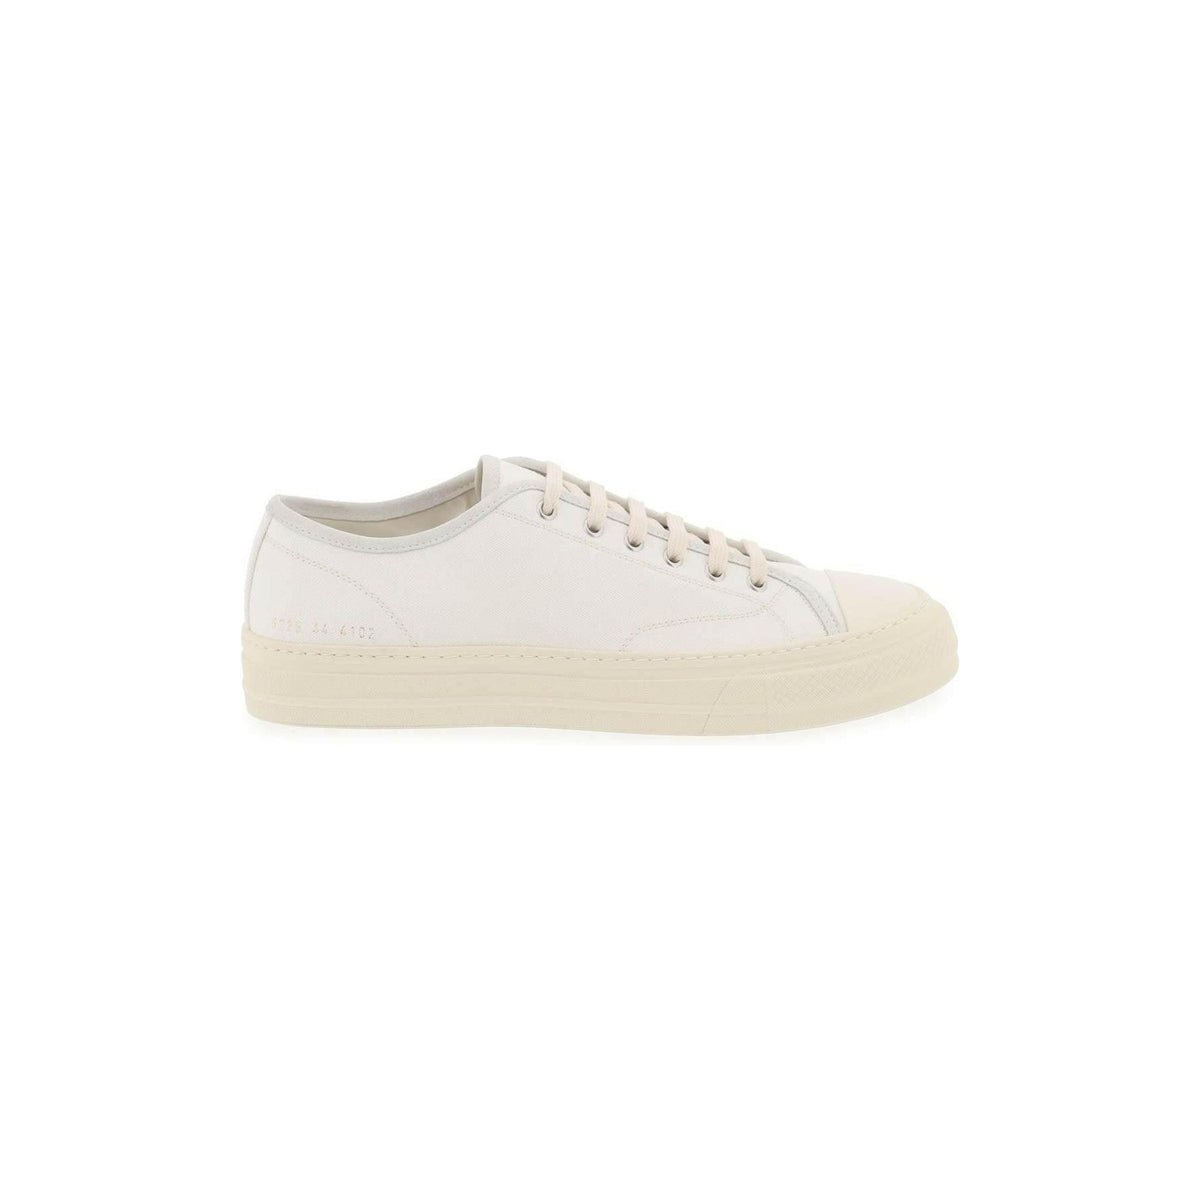 COMMON PROJECTS - Off-White Tournament Canvas Sneakers - JOHN JULIA